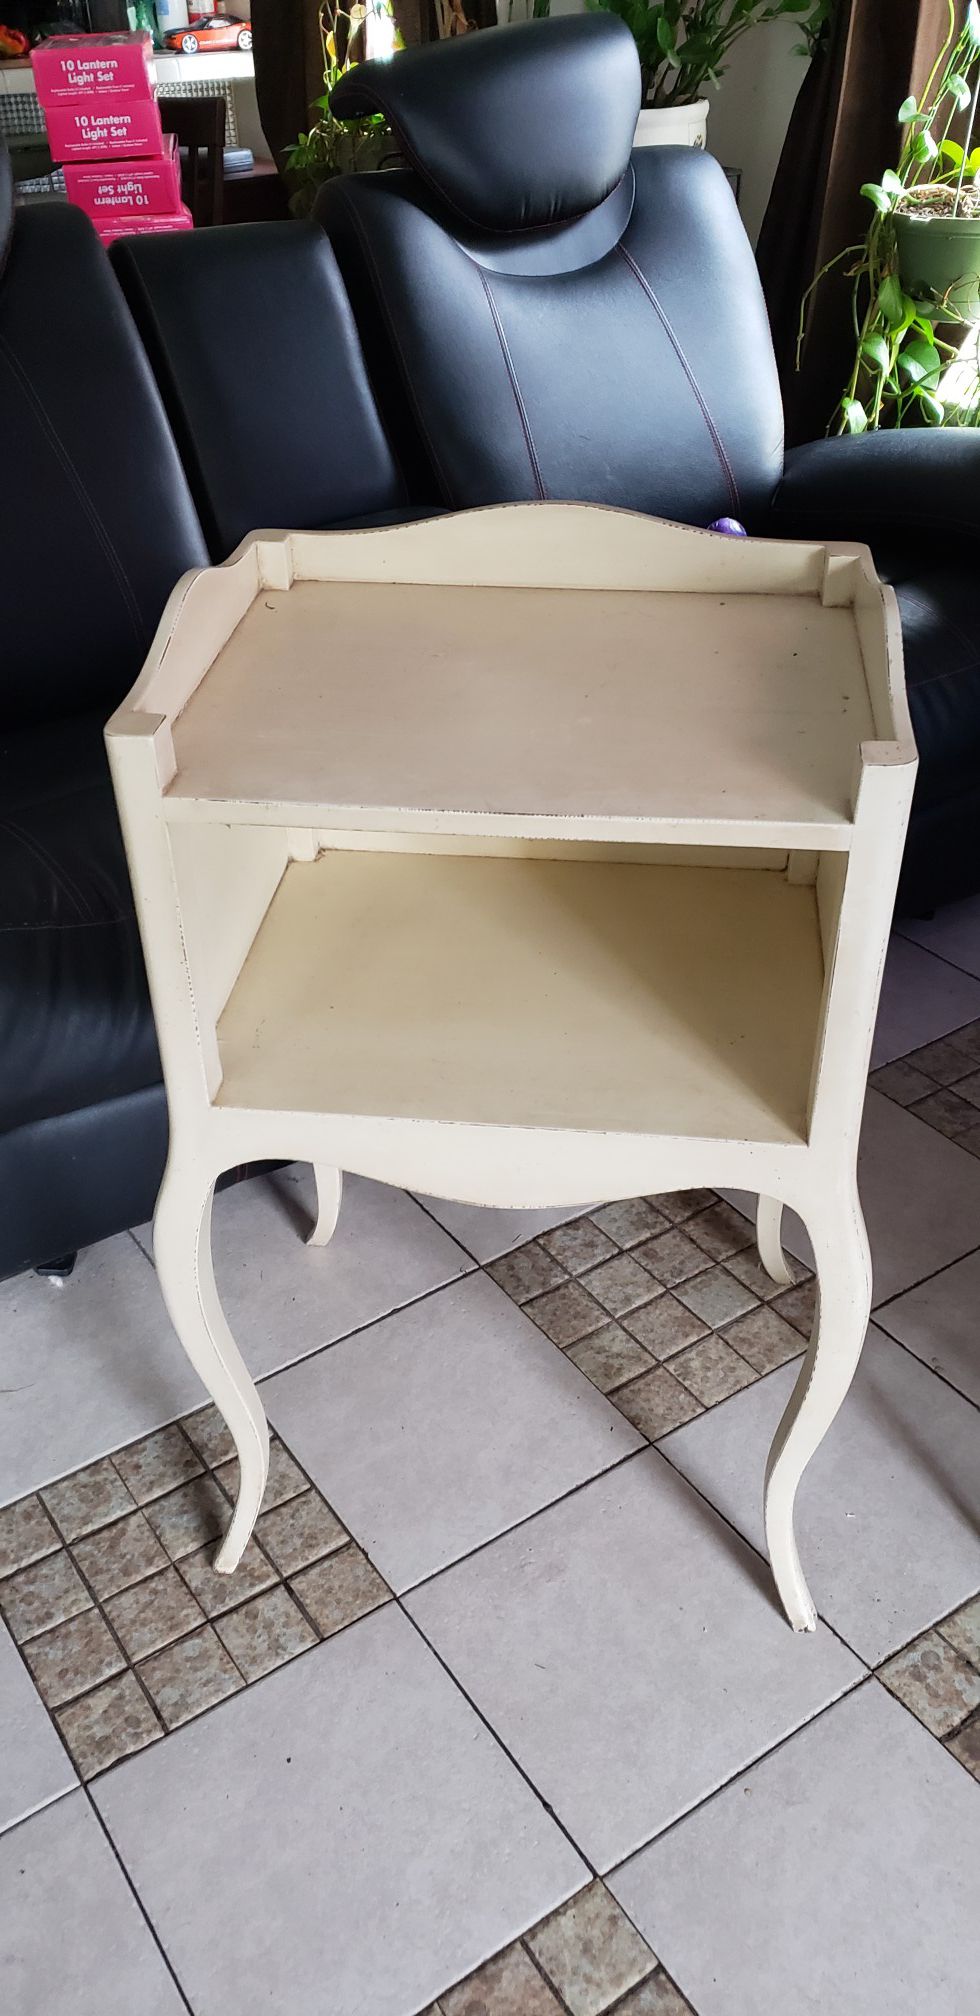 Ivory colored antique table, or desk